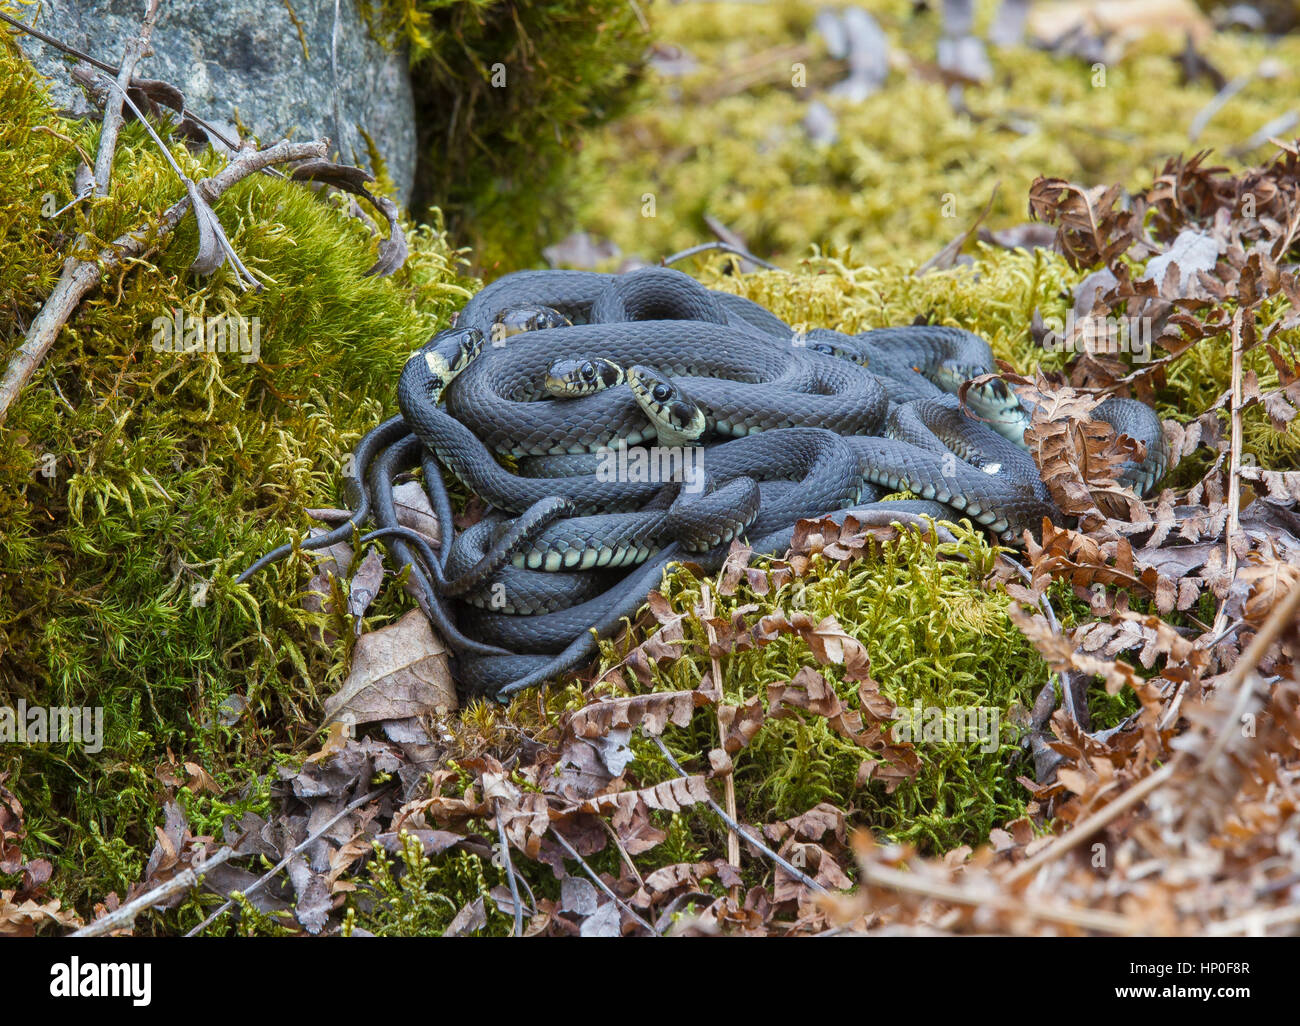 Ball of grass snakes (Natrix natrix) keeping warm coiled on a bed of brown dead bracken amid green moss covered boulders Stock Photo